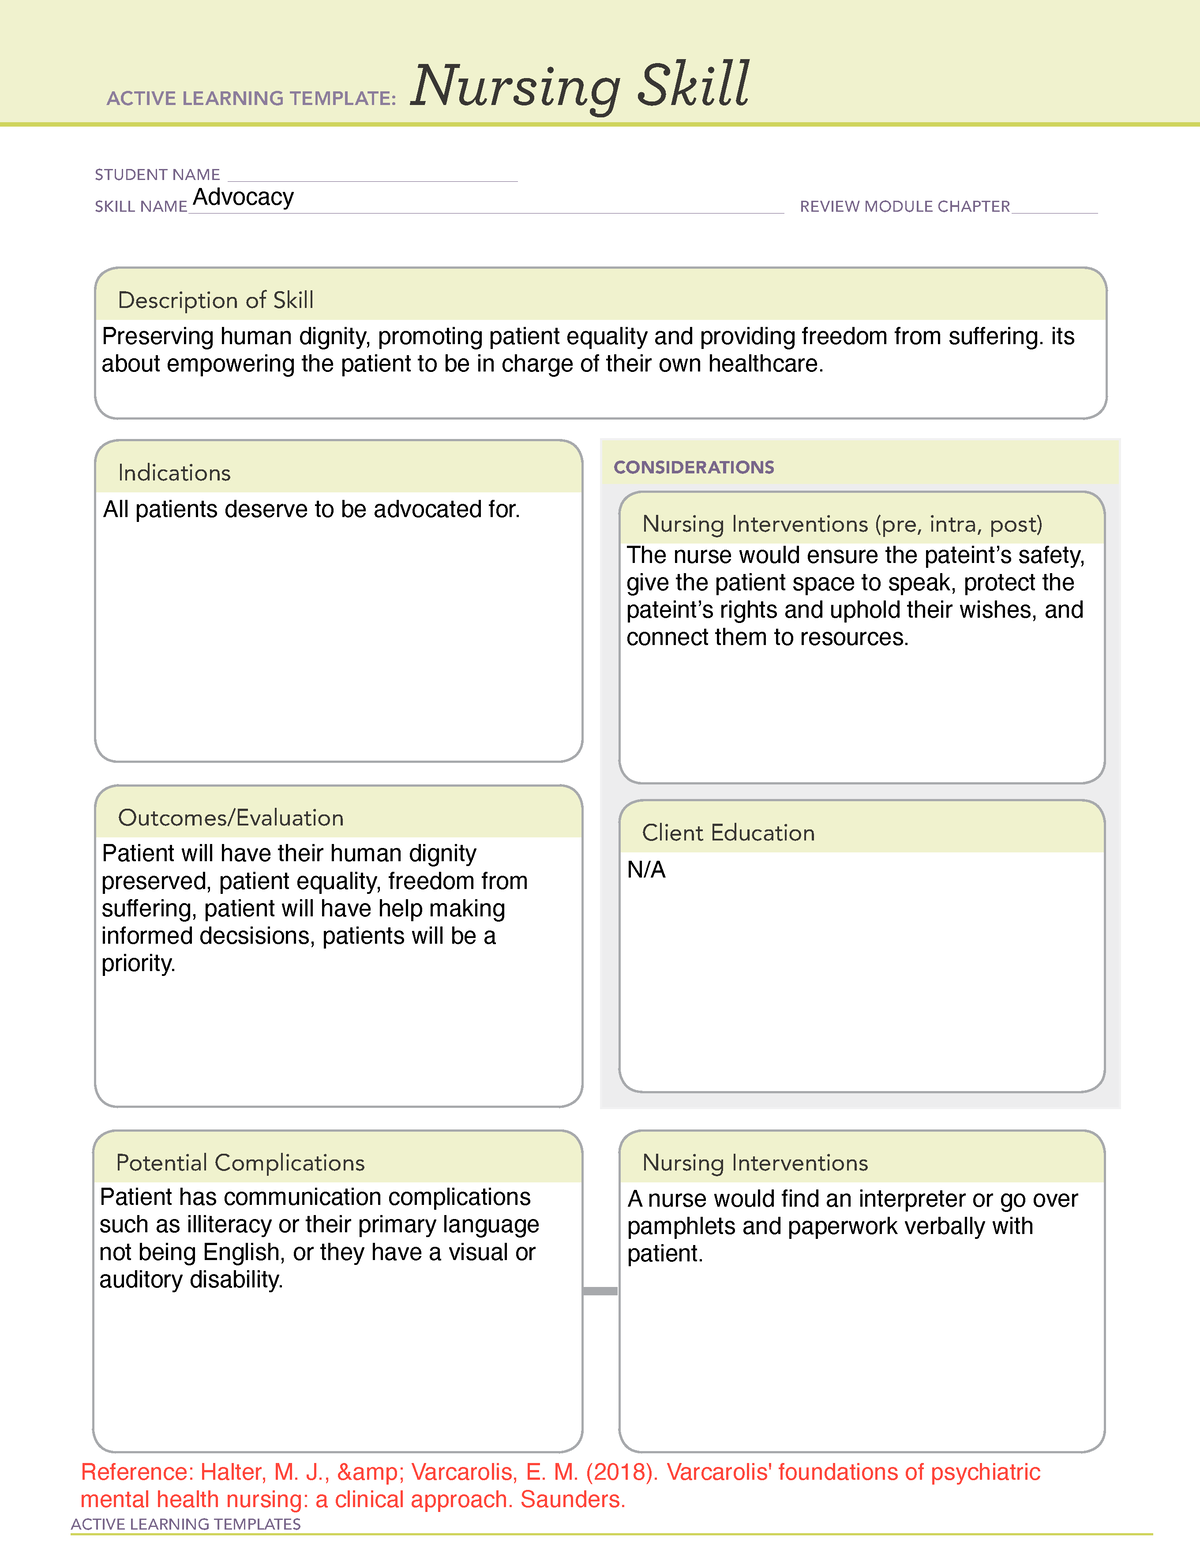 Advocacy ATI Template ACTIVE LEARNING TEMPLATES Nursing Skill STUDENT